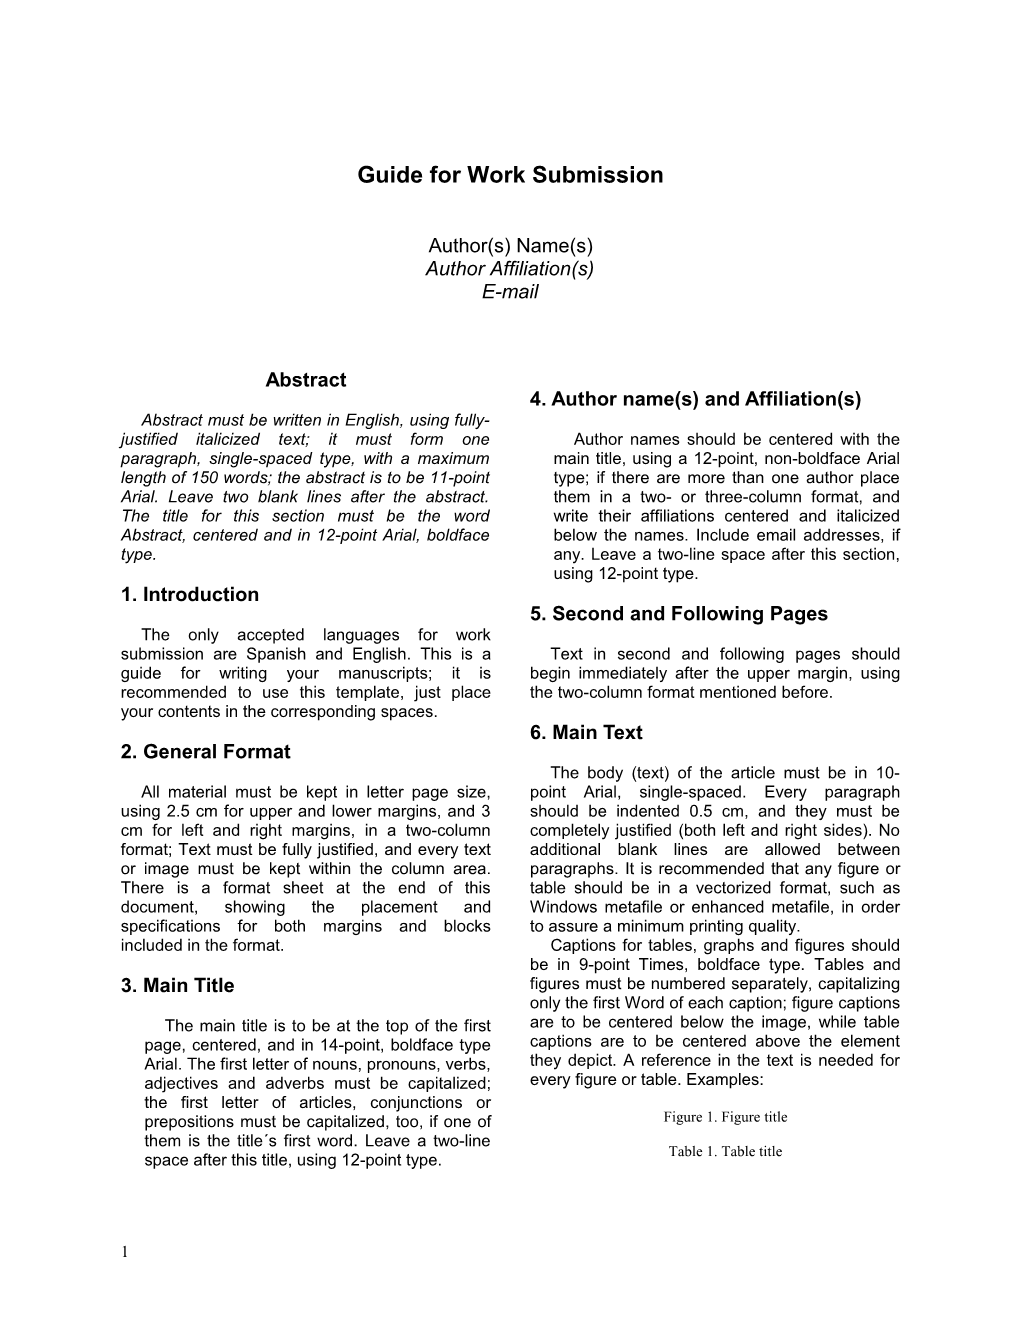 Guide for Work Submission